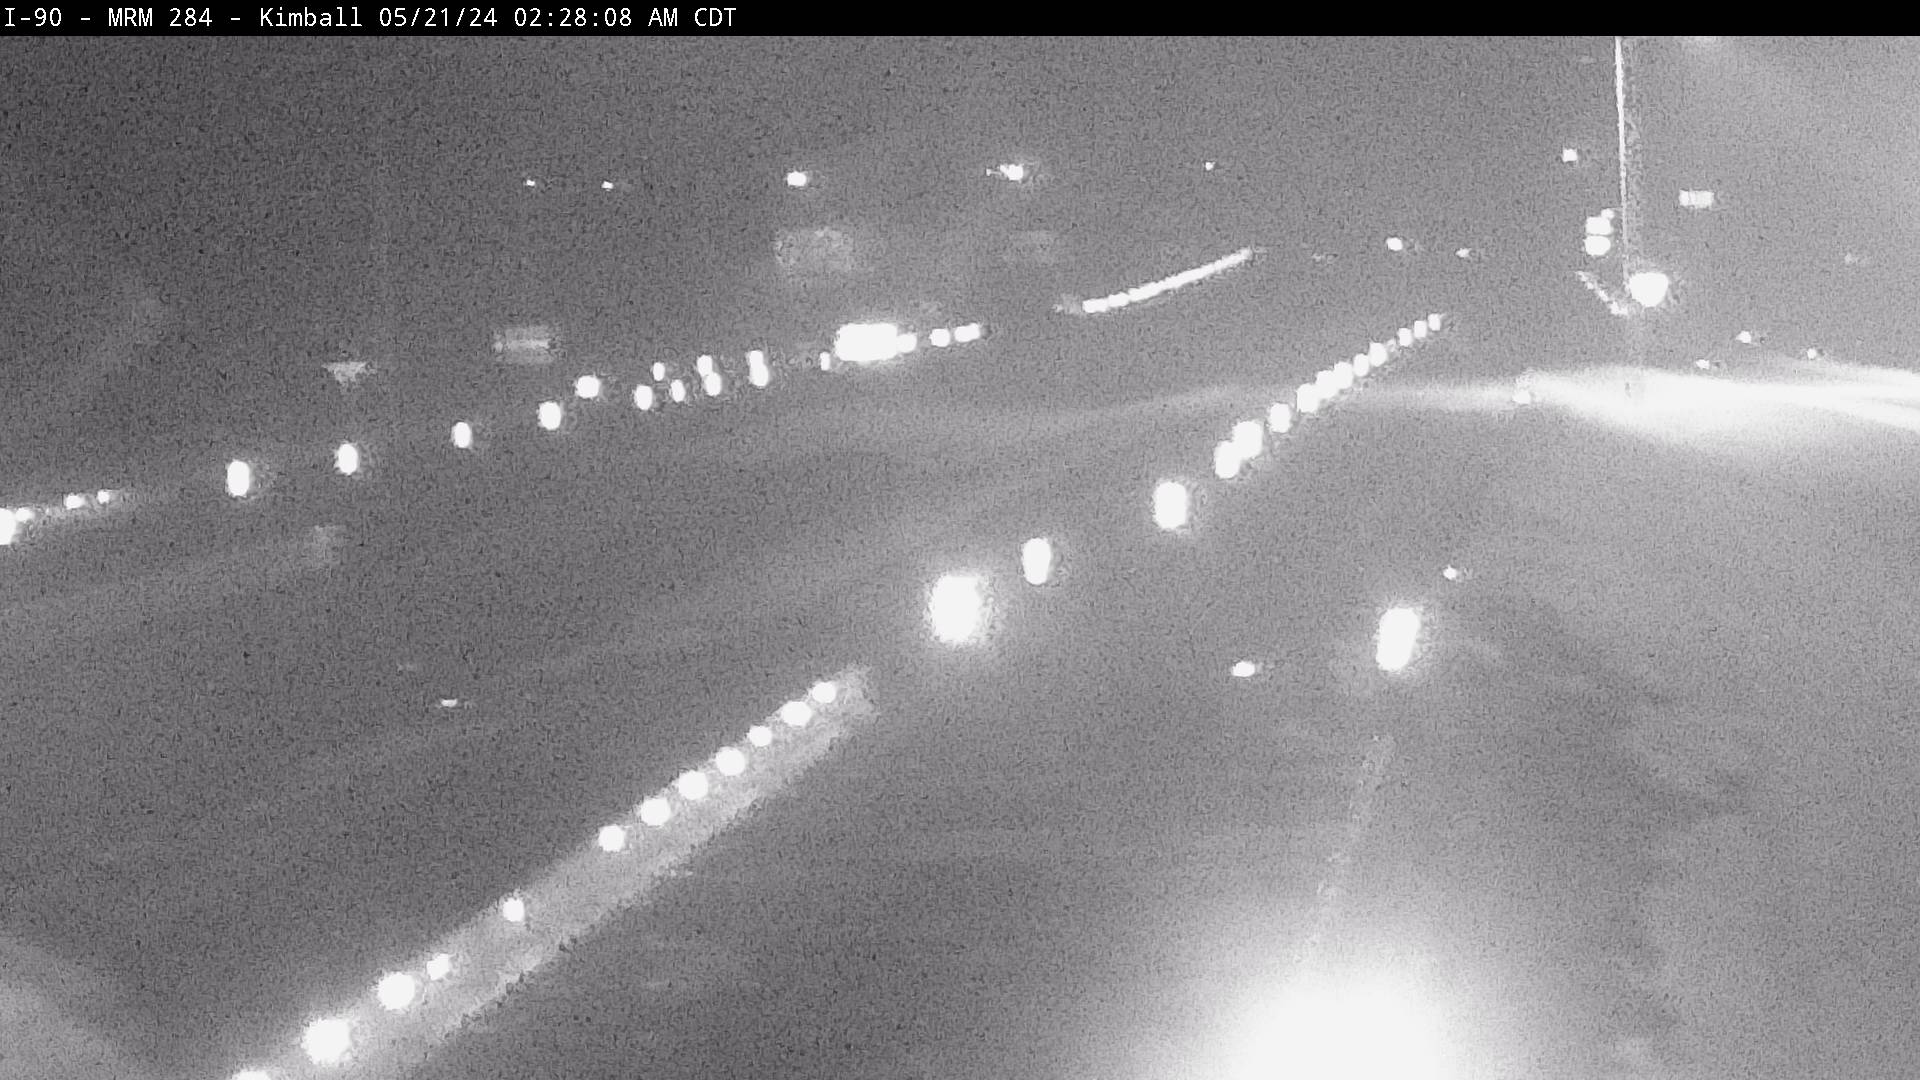 Traffic Cam South of town along I-90 @ MP 284 - East Player